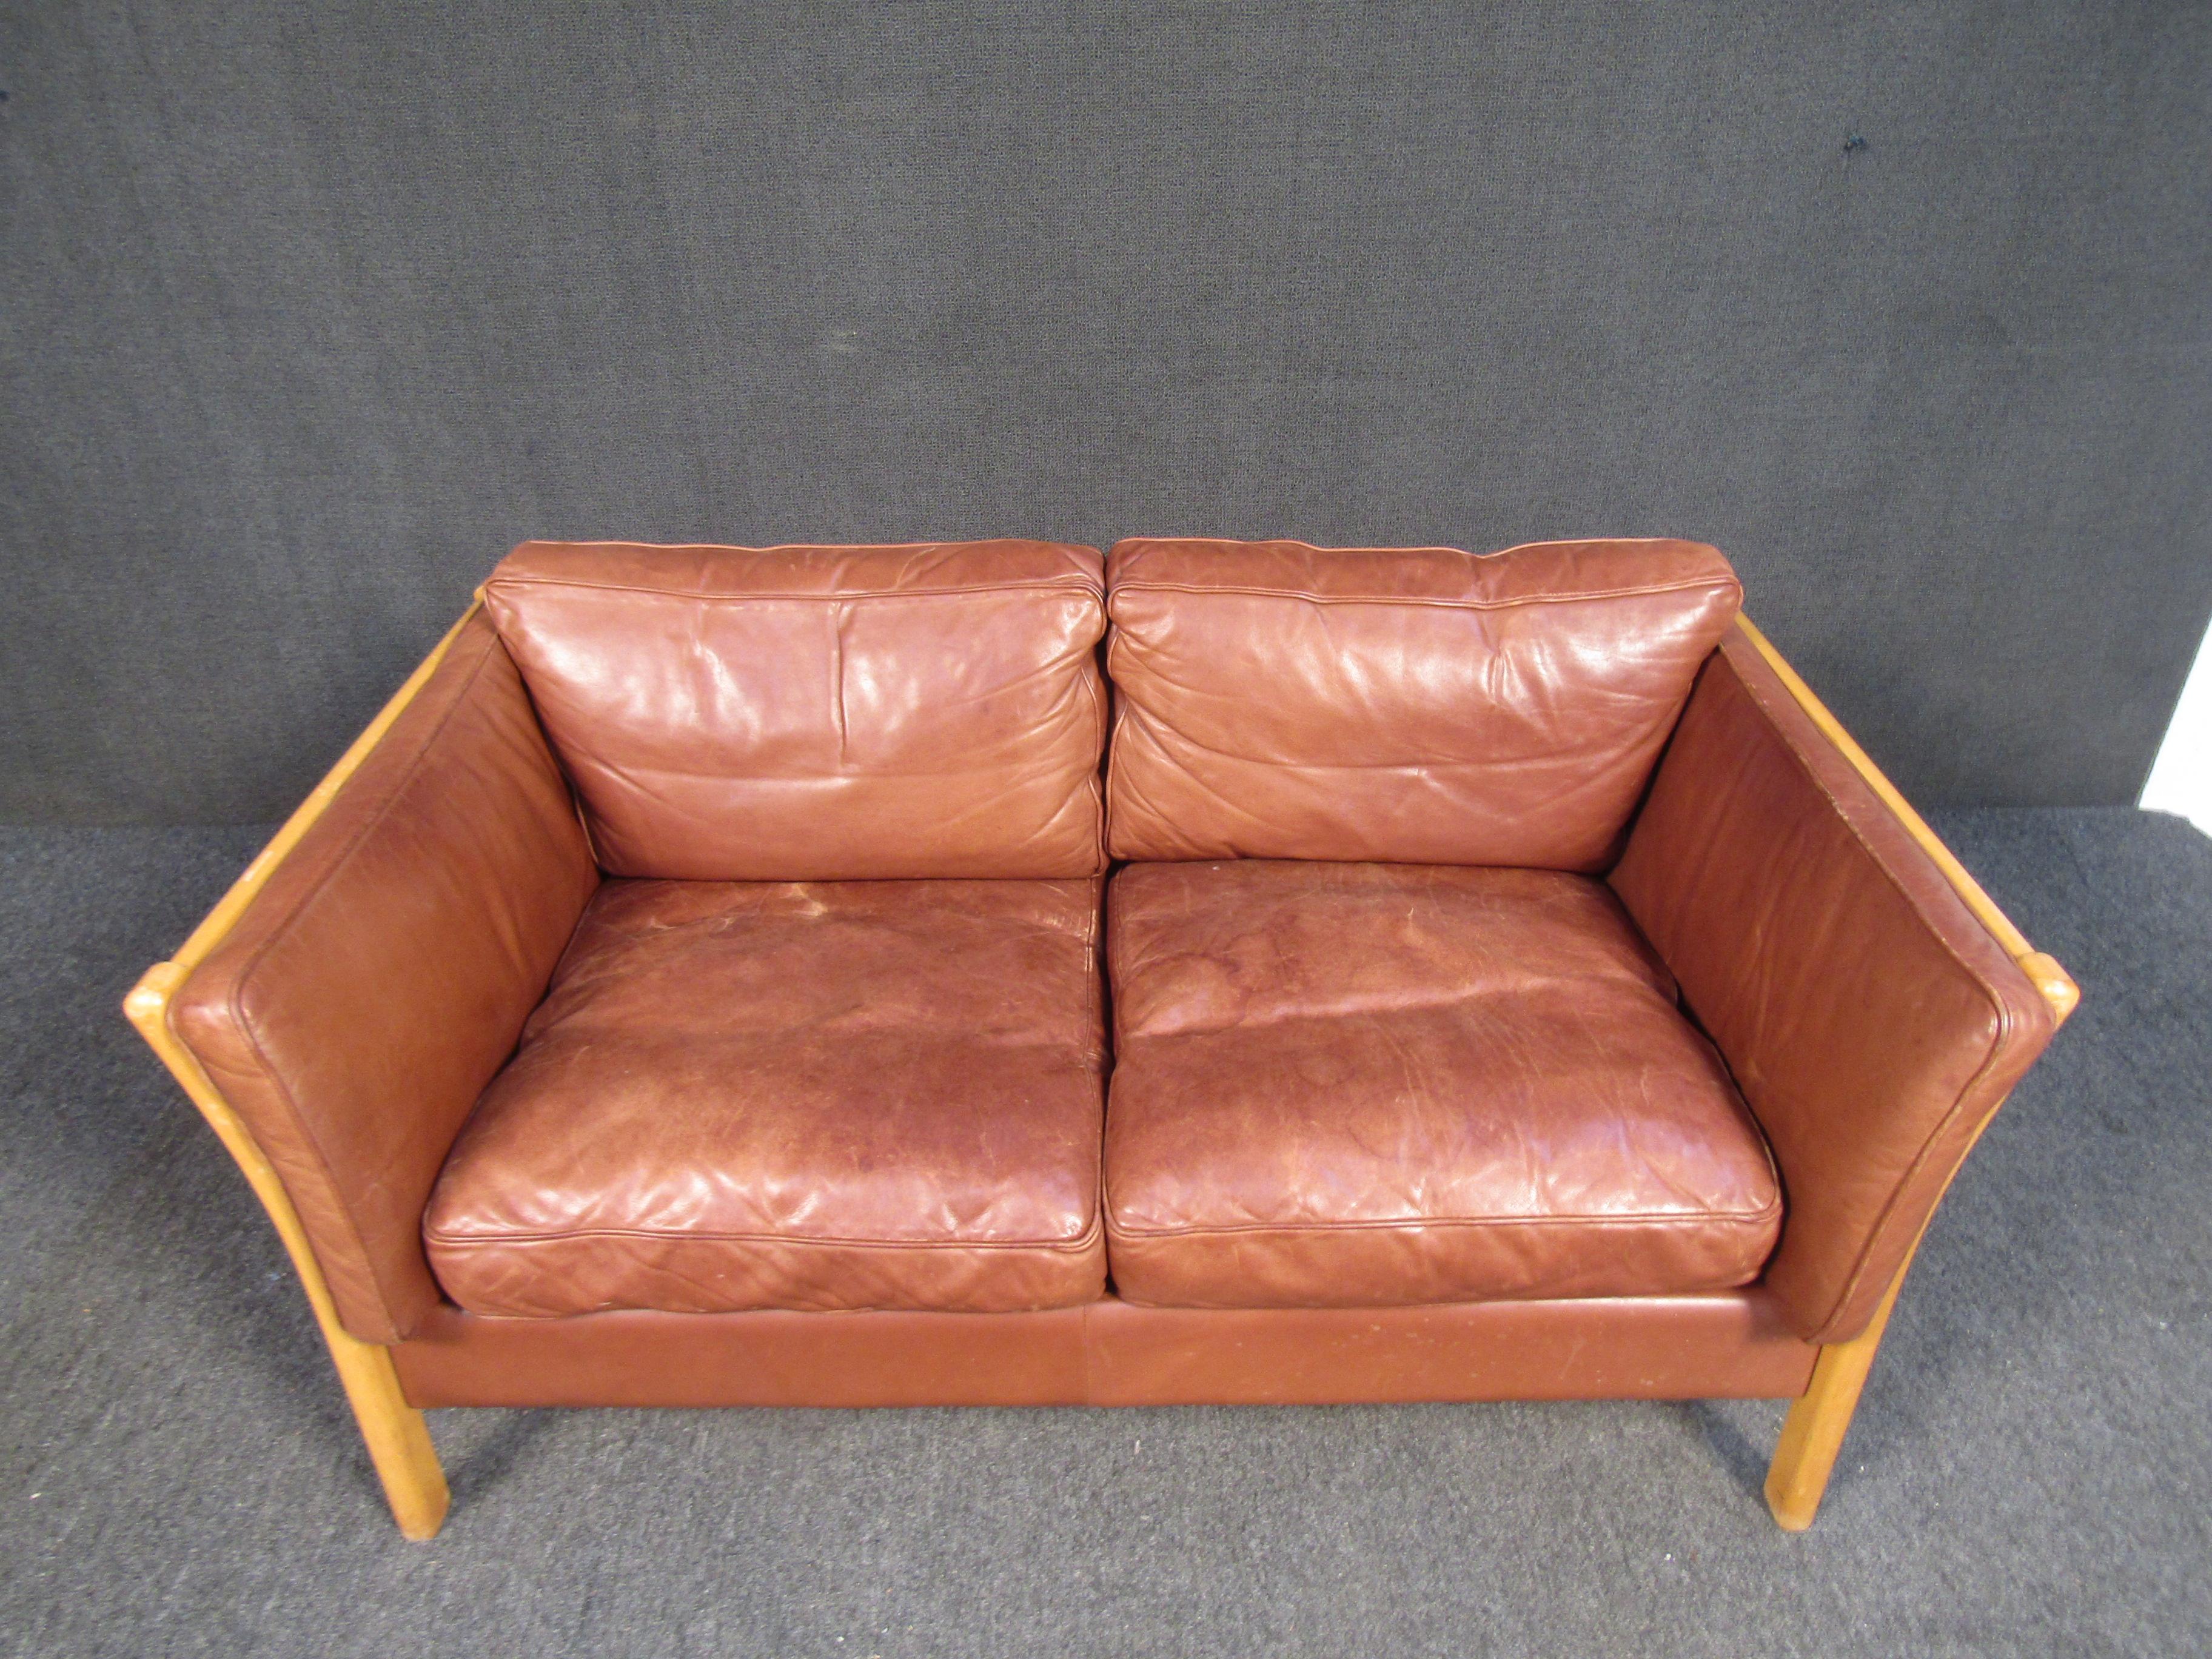 Combining leather upholstery with wooden frames, this vintage couch offers comfortable seating through a stylish Mid-Century Modern design. Please confirm item location with seller (NY/NJ).